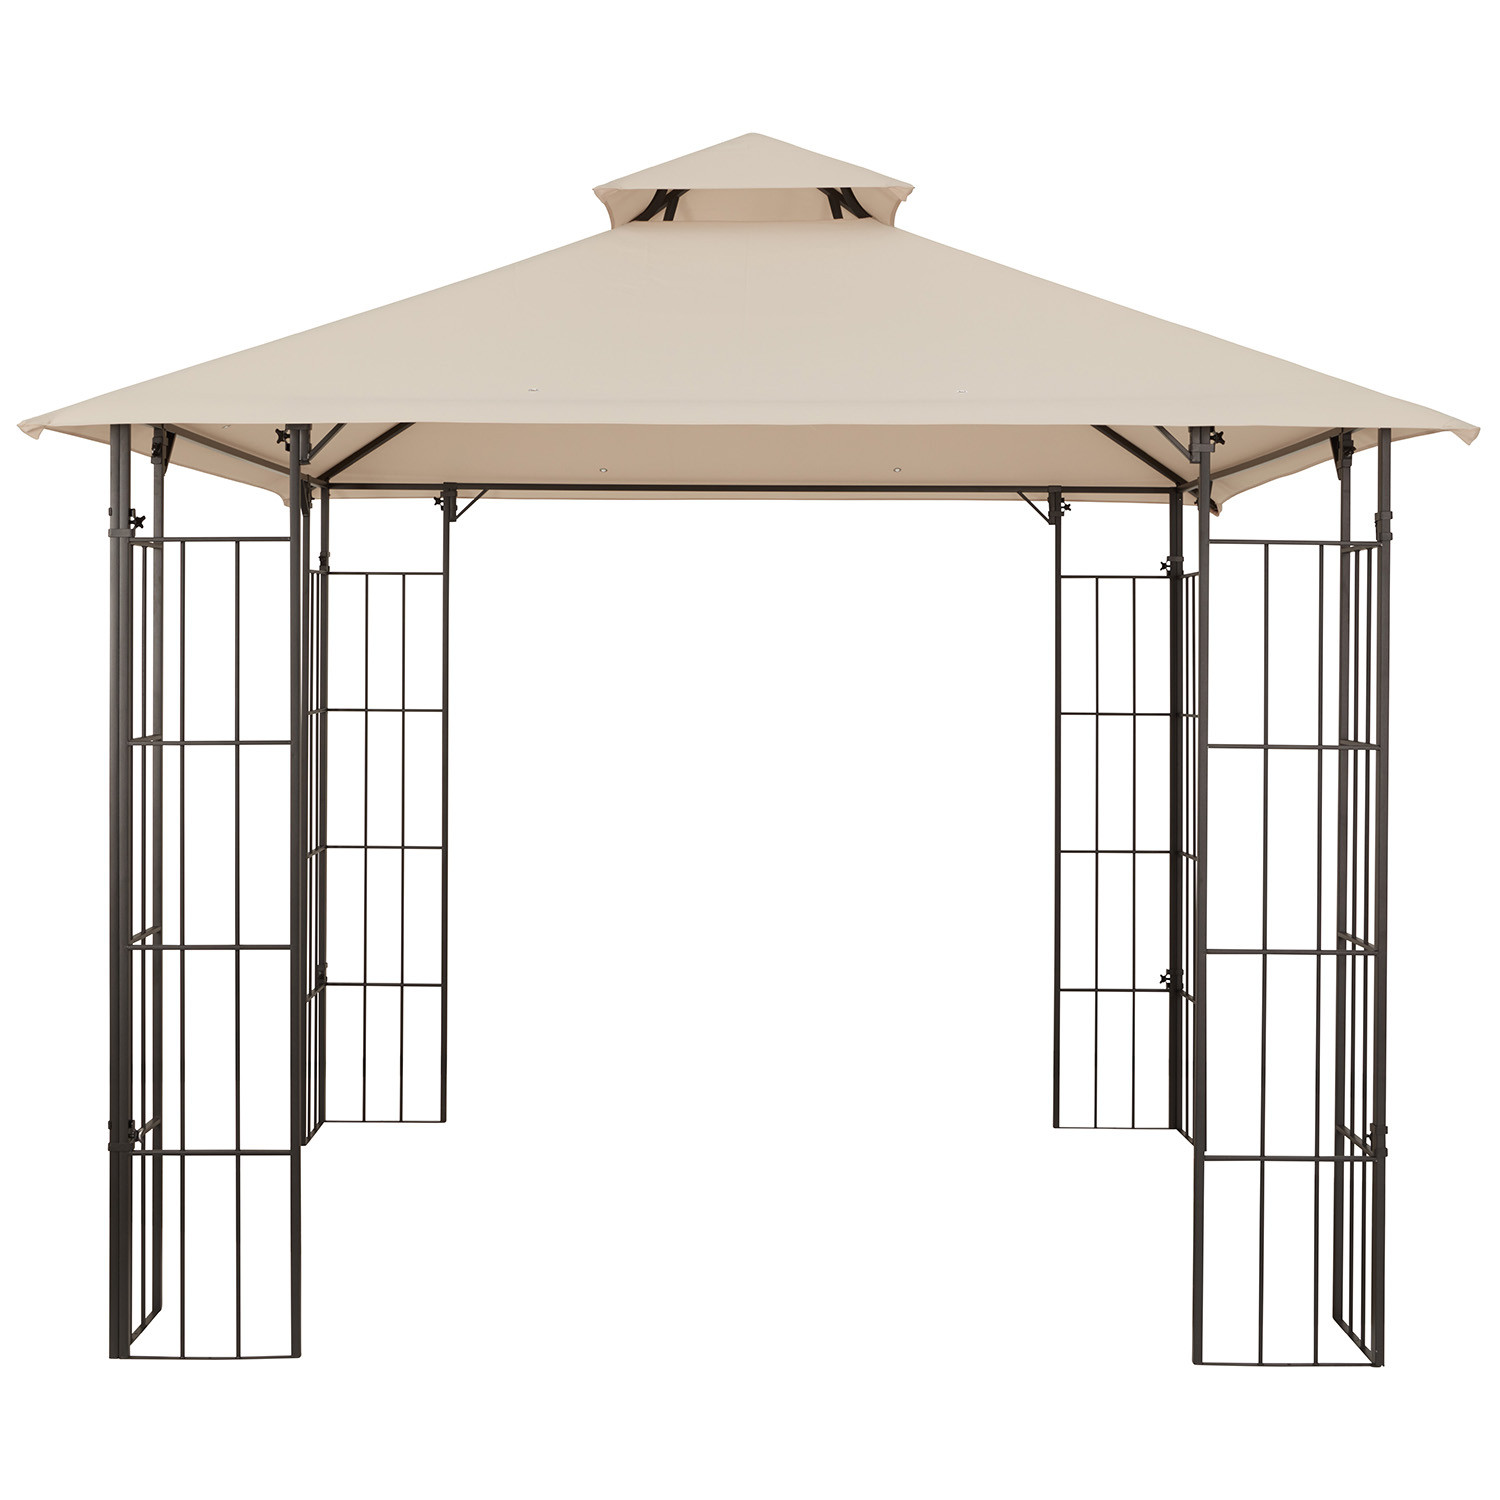 Athens 3 x 3m Gazebo Canopy Replacement Image 4